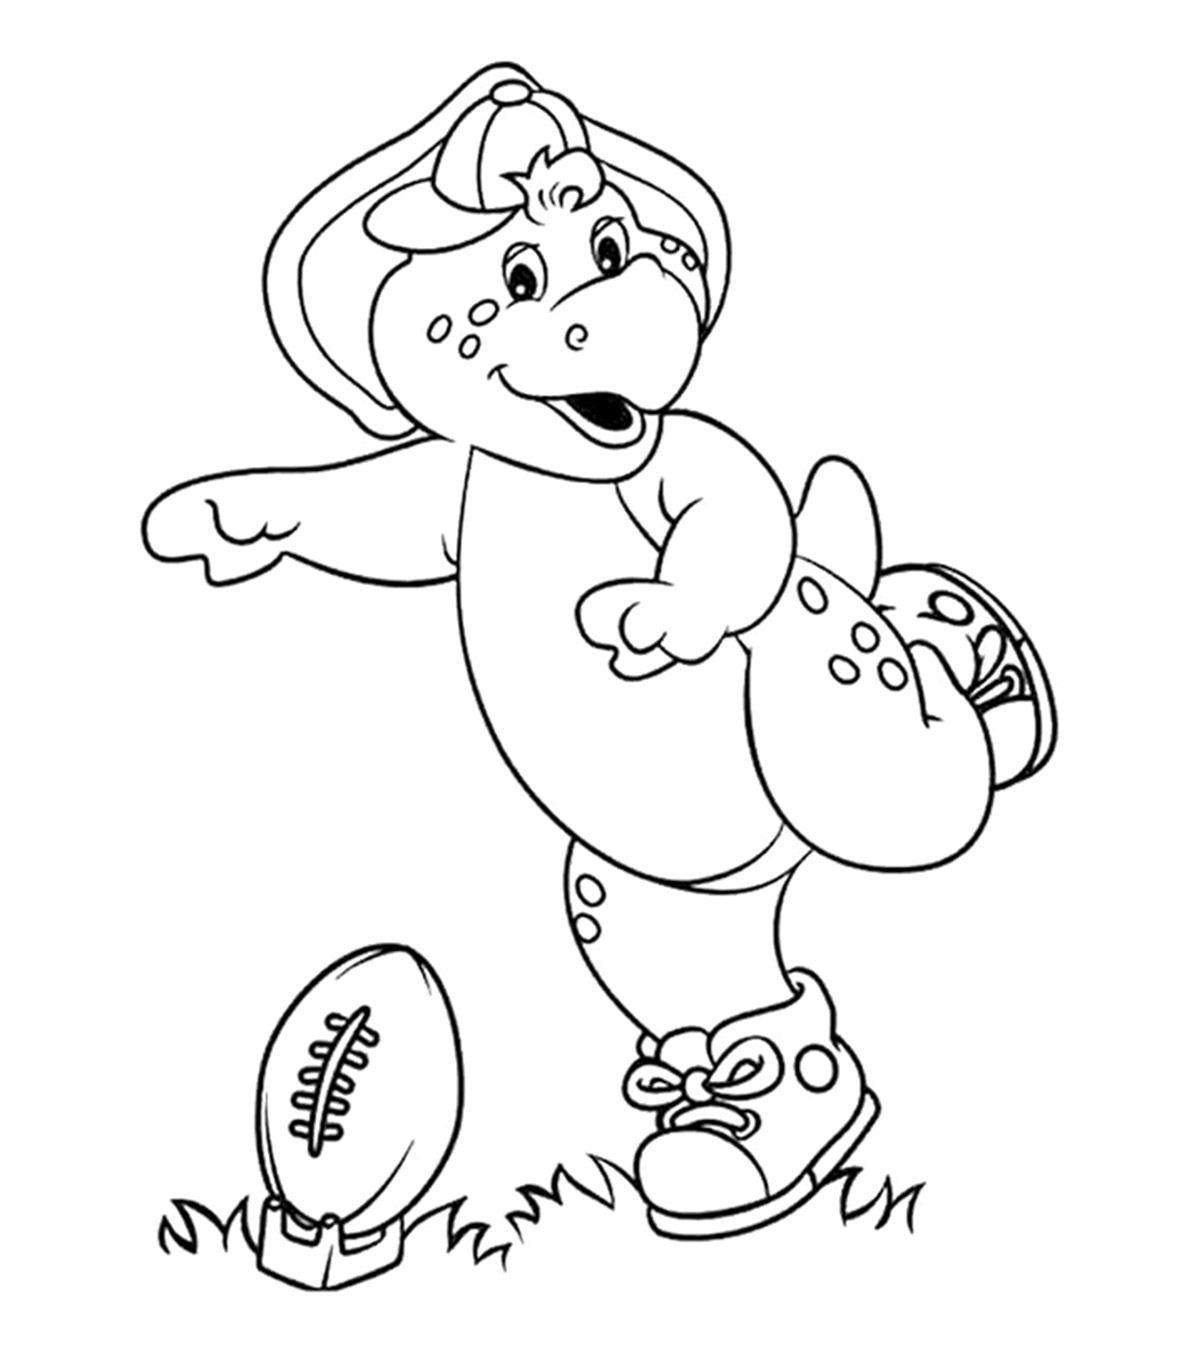 10 Cute Barney Coloring Pages For Your Little Ones